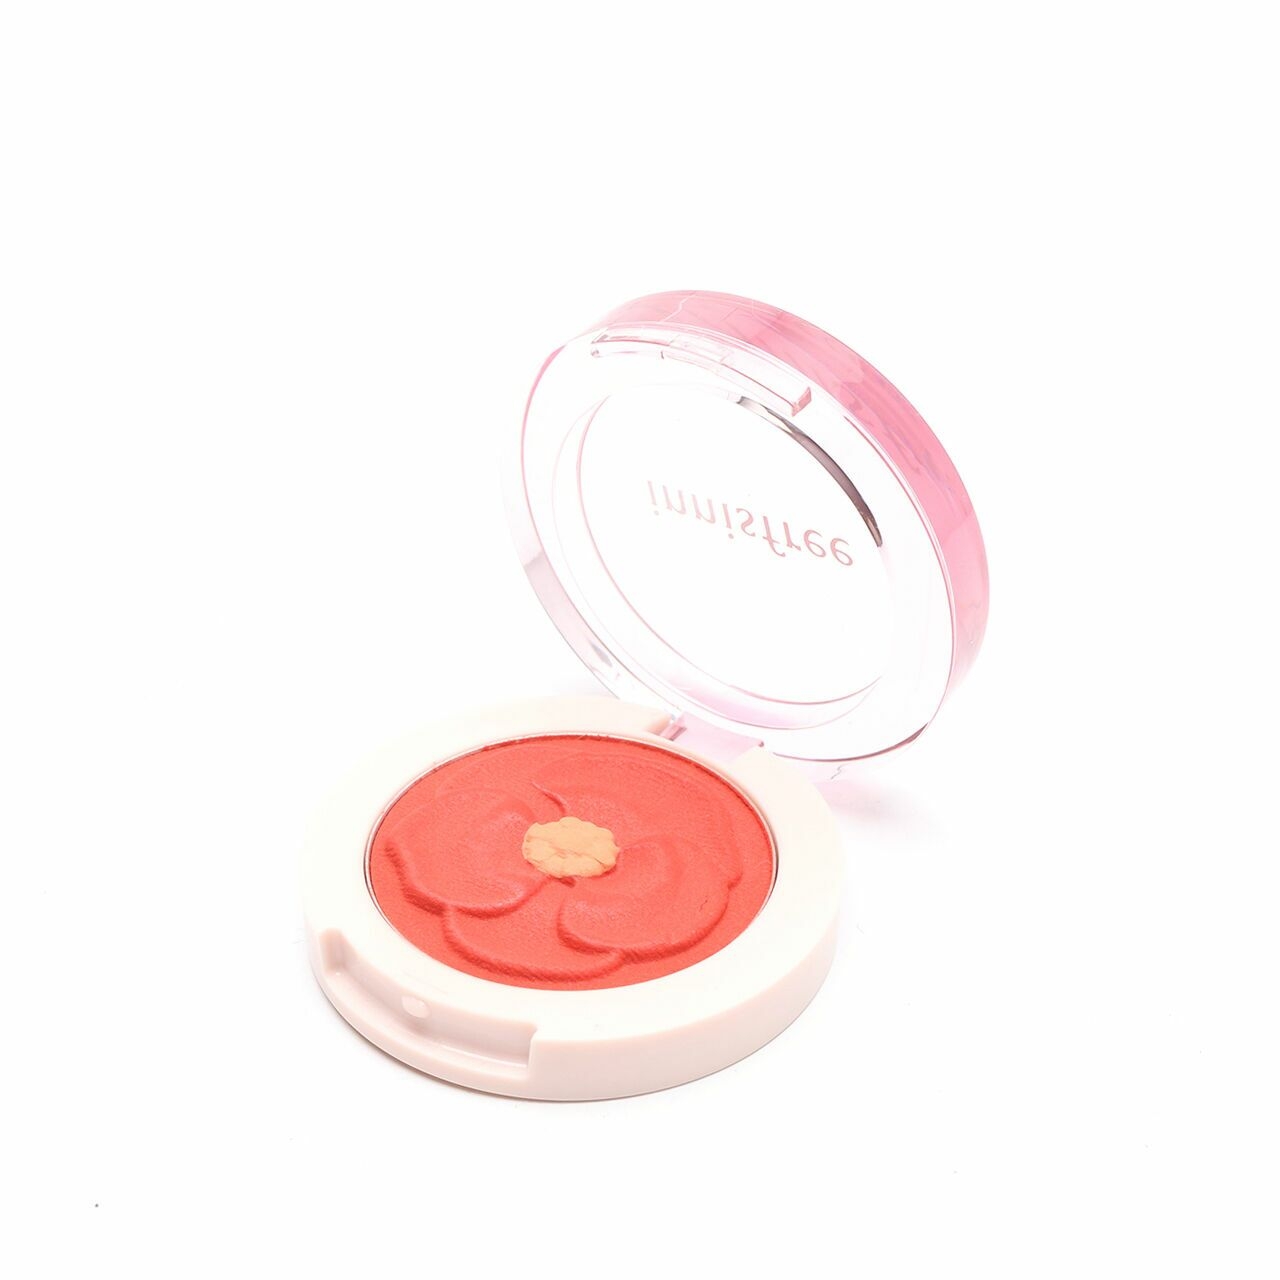 Innisfree Camellia Blooming Blusher Faces